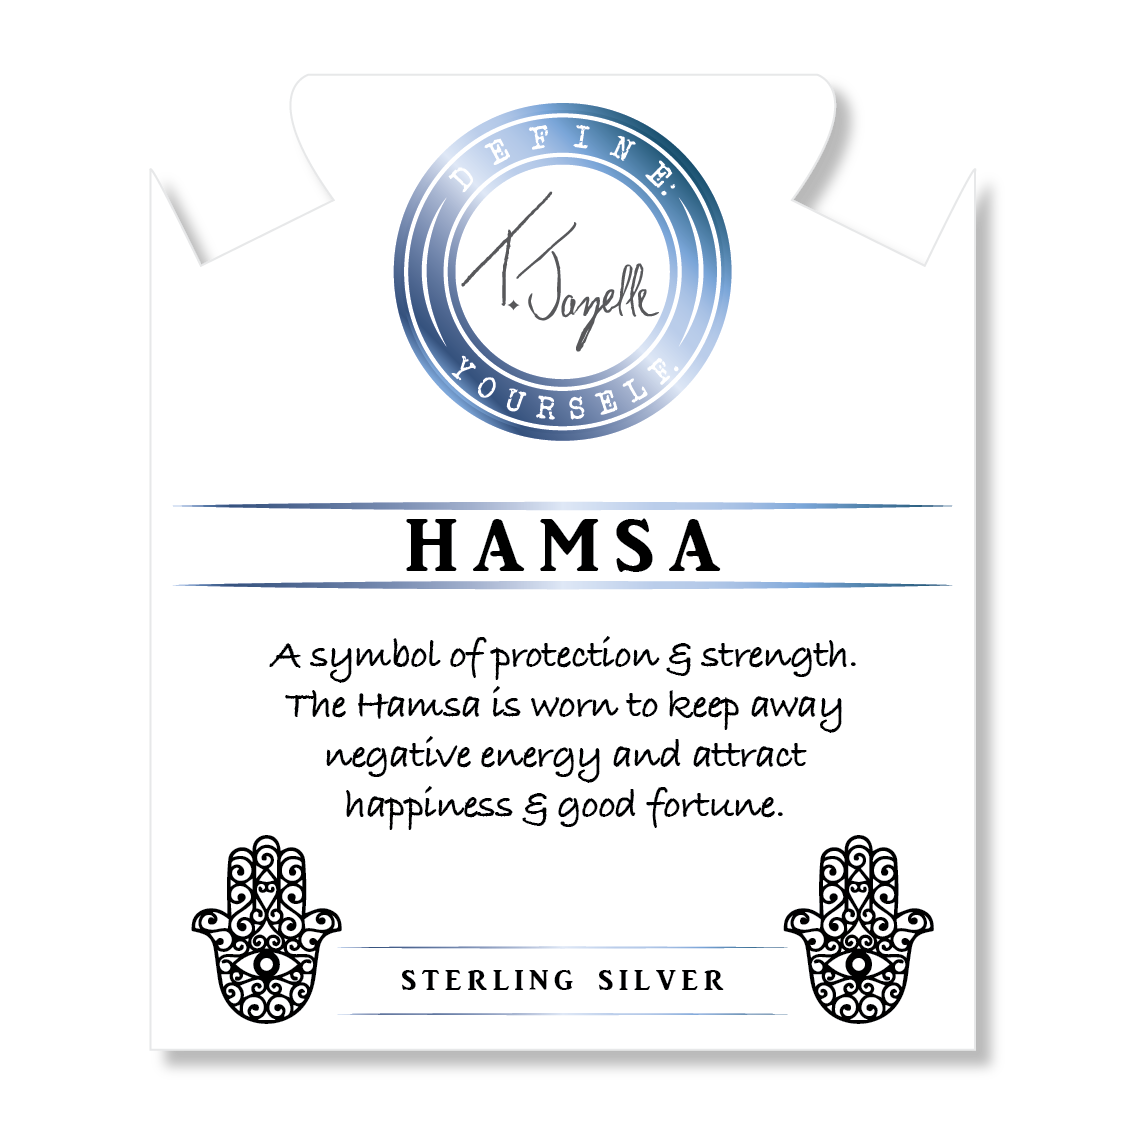 Hamsa Hand Symbol – What Does It Really Mean? | Hamsa hand tattoo, Hamsa  hand jewelry, Hand symbols